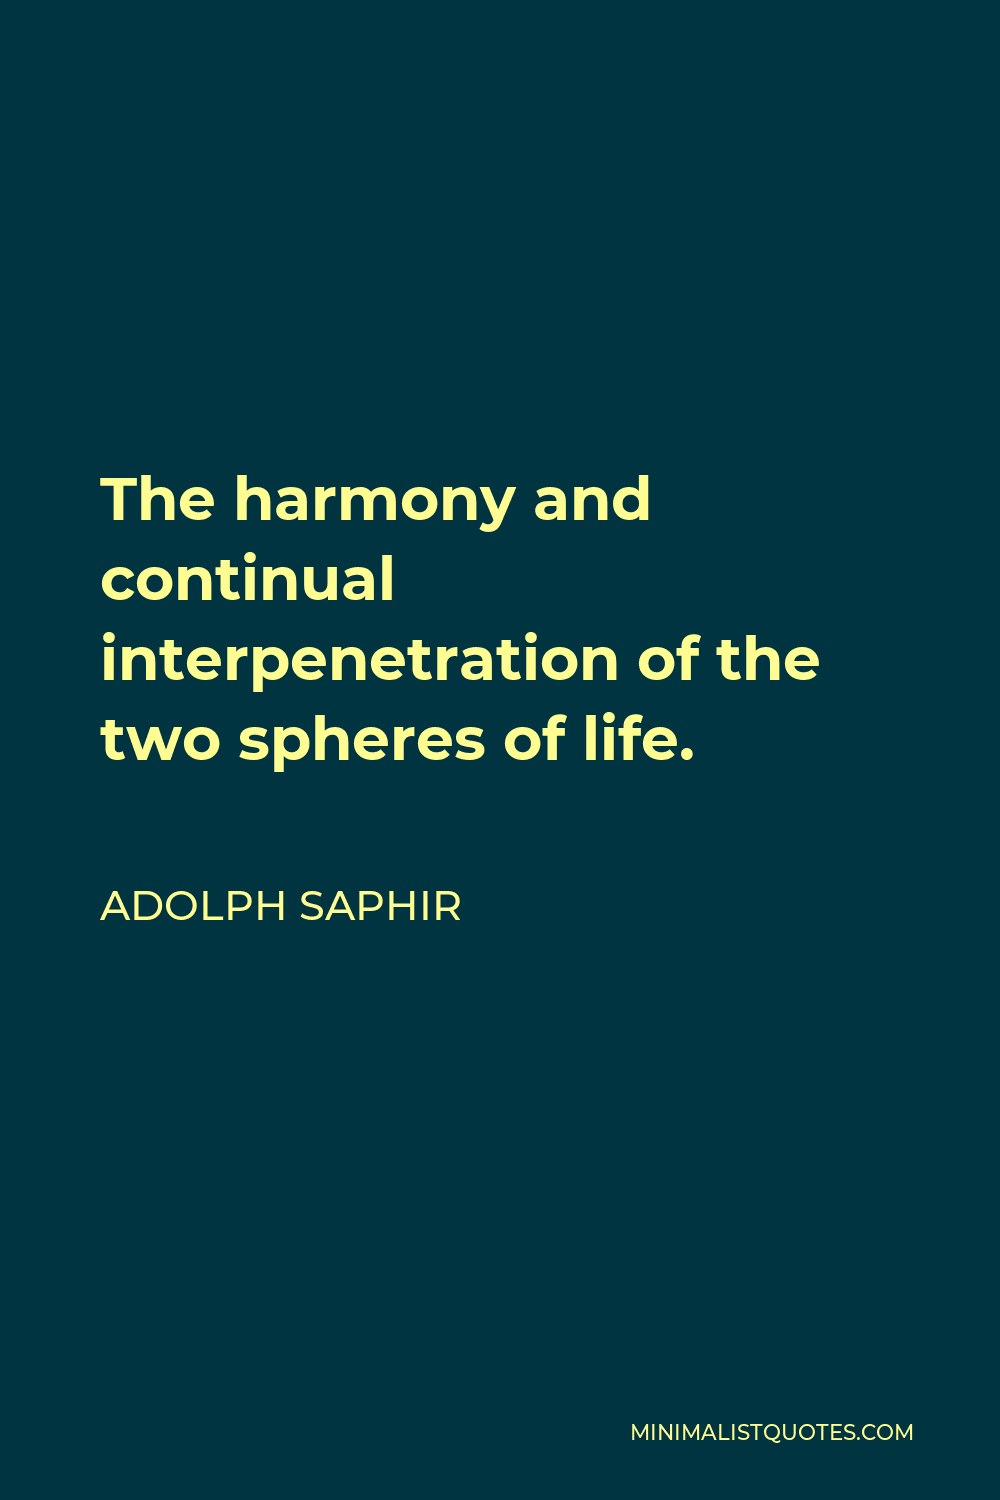 Adolph Saphir Quote - The harmony and continual interpenetration of the two spheres of life.